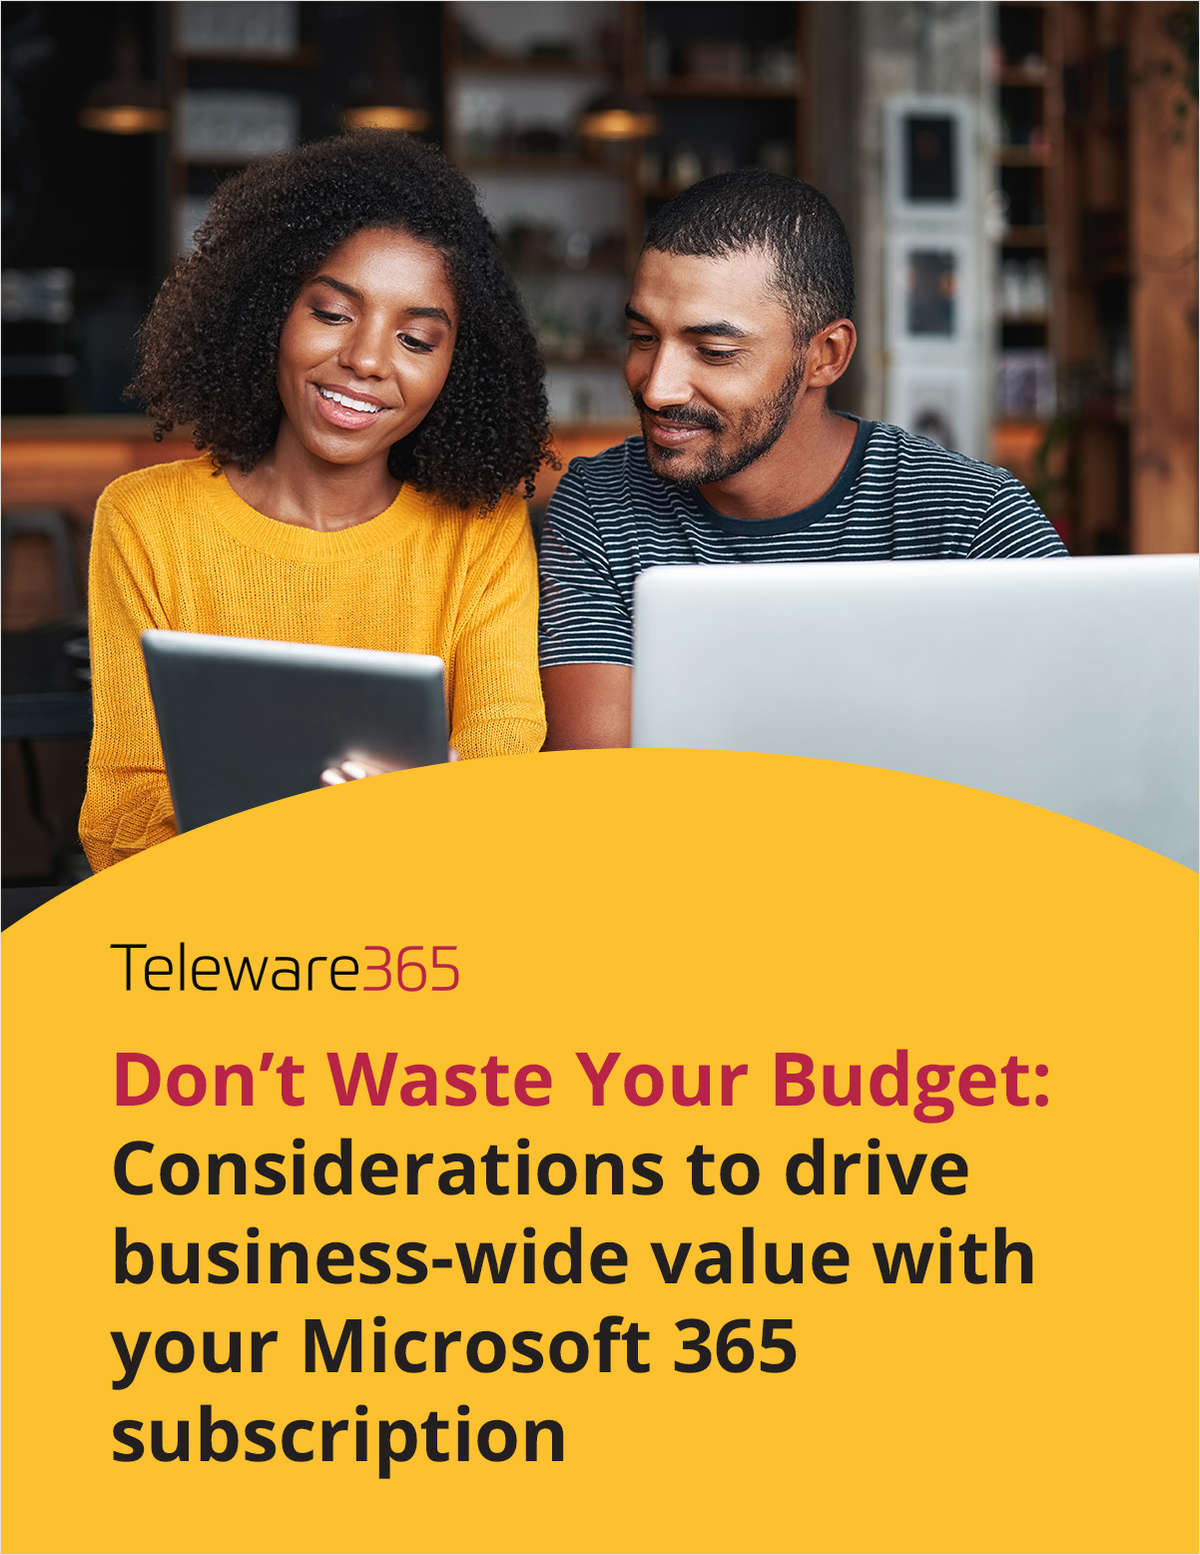 Don't Waste Your Budget